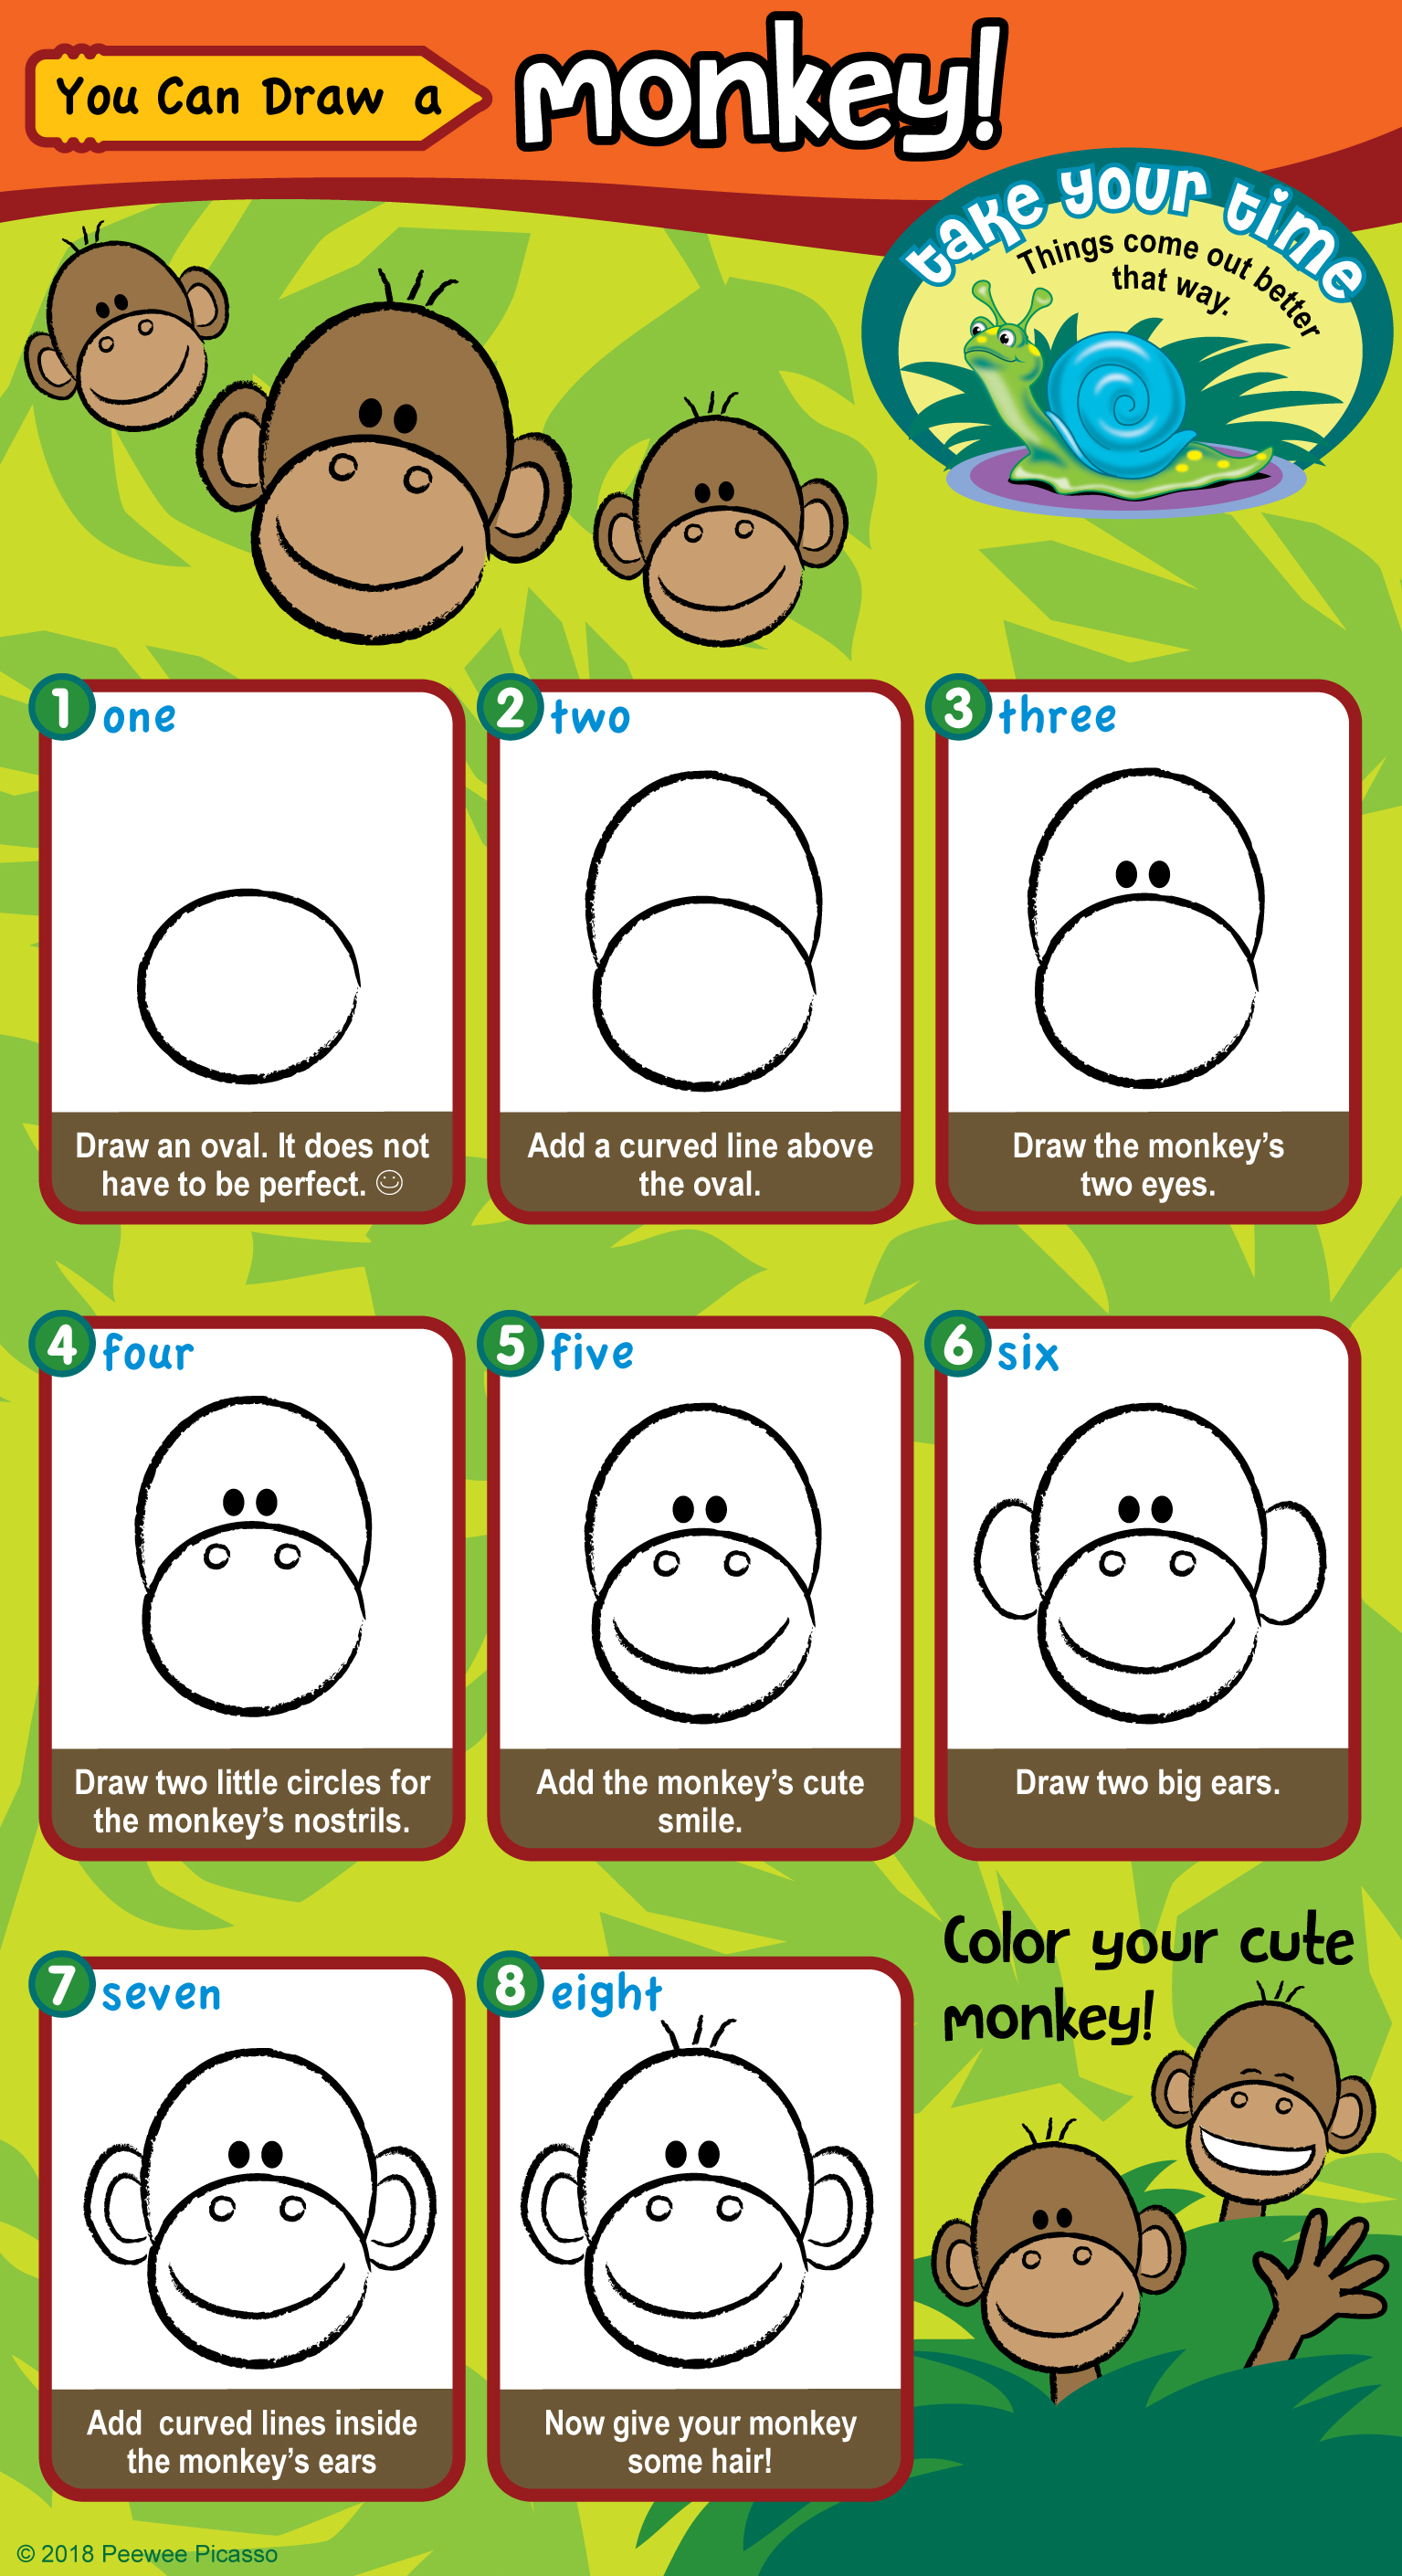 easy step-by-step instructions to draw a monkey for children